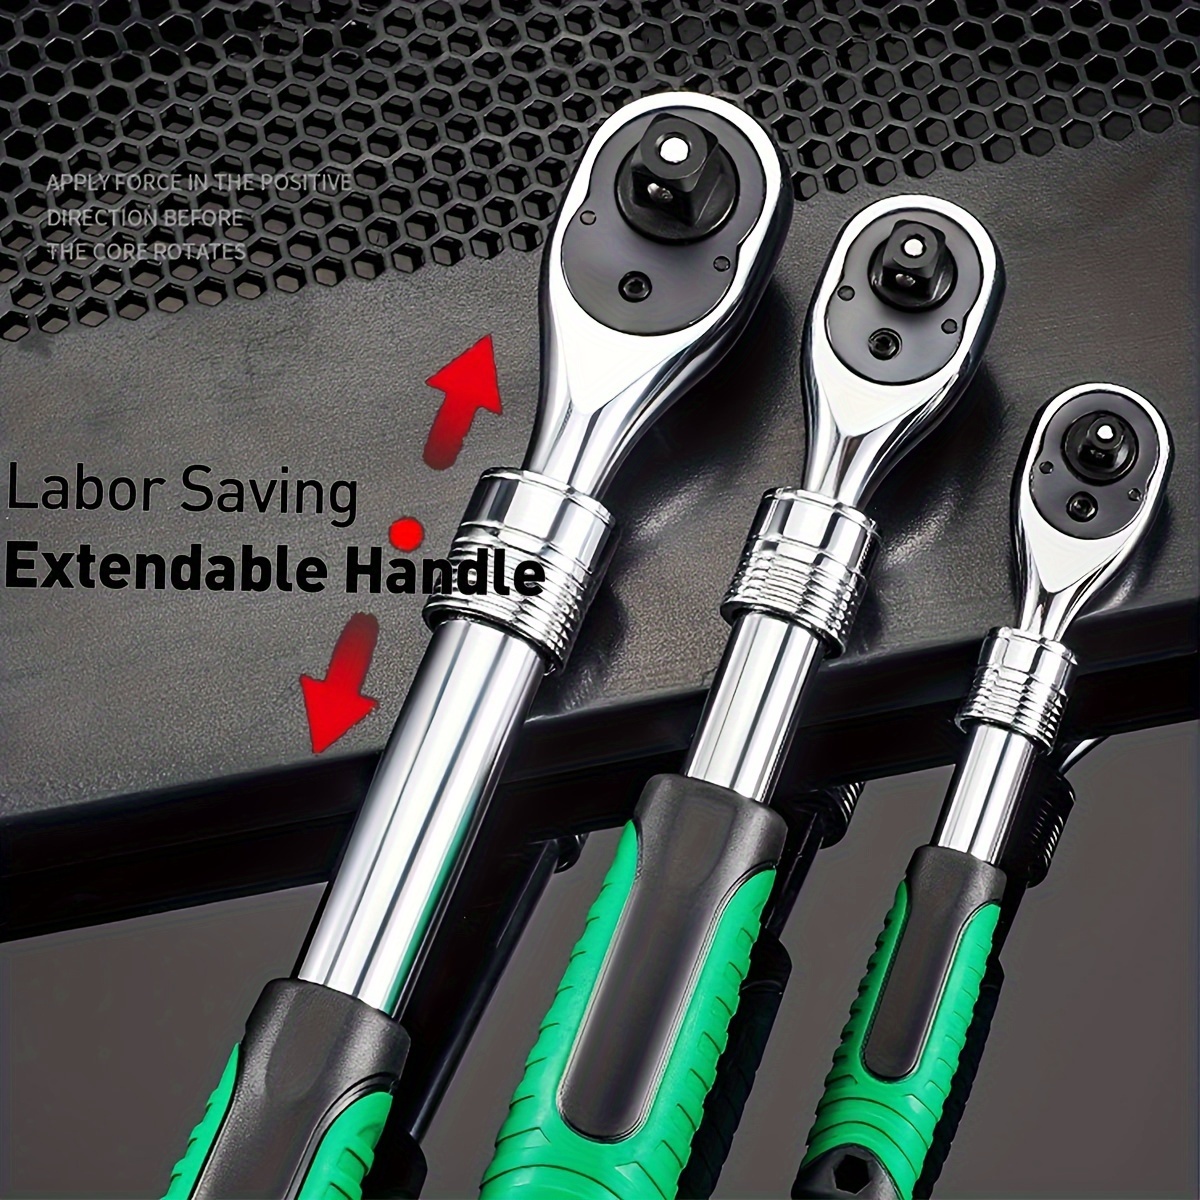 

1pc 1/4in, 3/8in, 1/2in Drive Socket Ratchet Set, Extendable Handle Wrench Quick-release Reversible Gear Torque Spanner Mechanical Tools, Ratchet Handle Wrench 72-tooth Quick-release Reversible